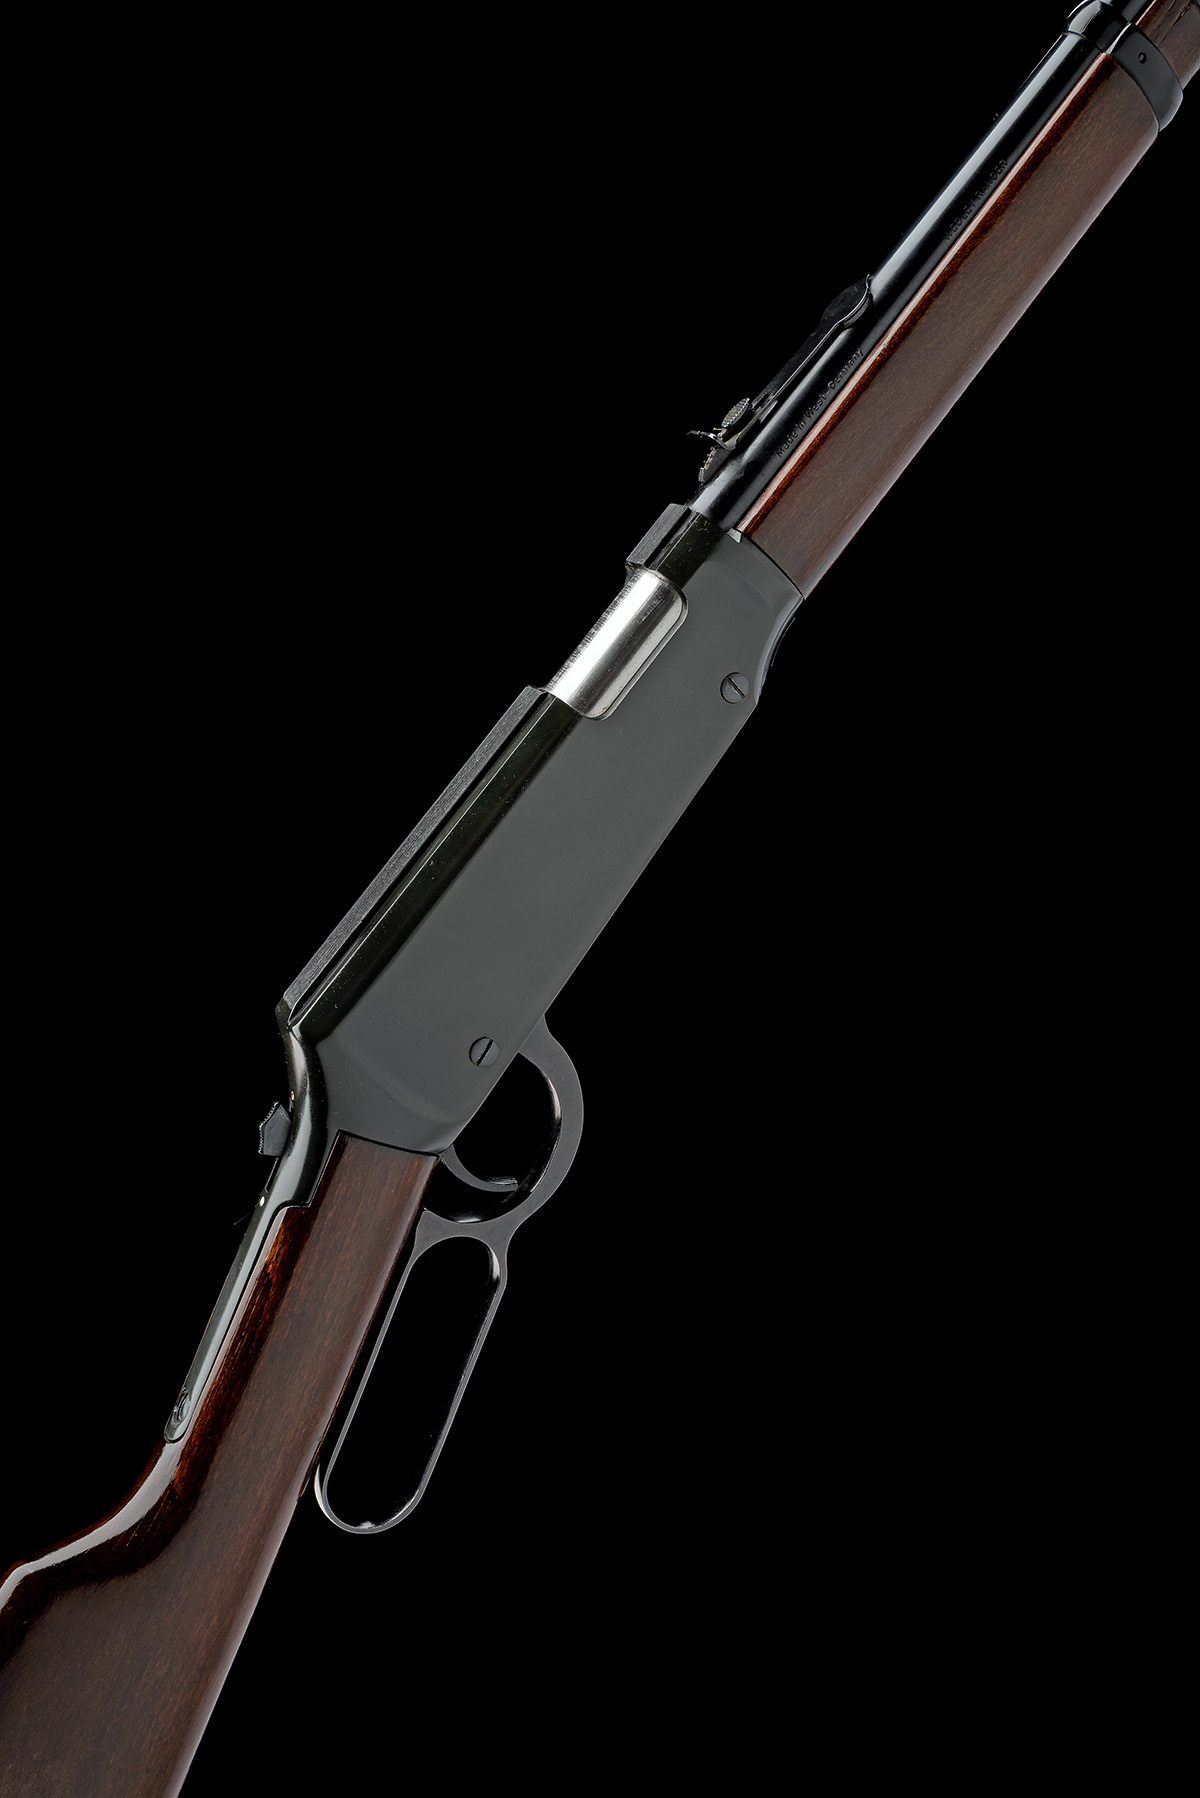 A SCARCE .177 WEBLEY LEVER-ACTION AIR-RIFLE, MODEL 'RANGER', serial no. 000673, one of a small